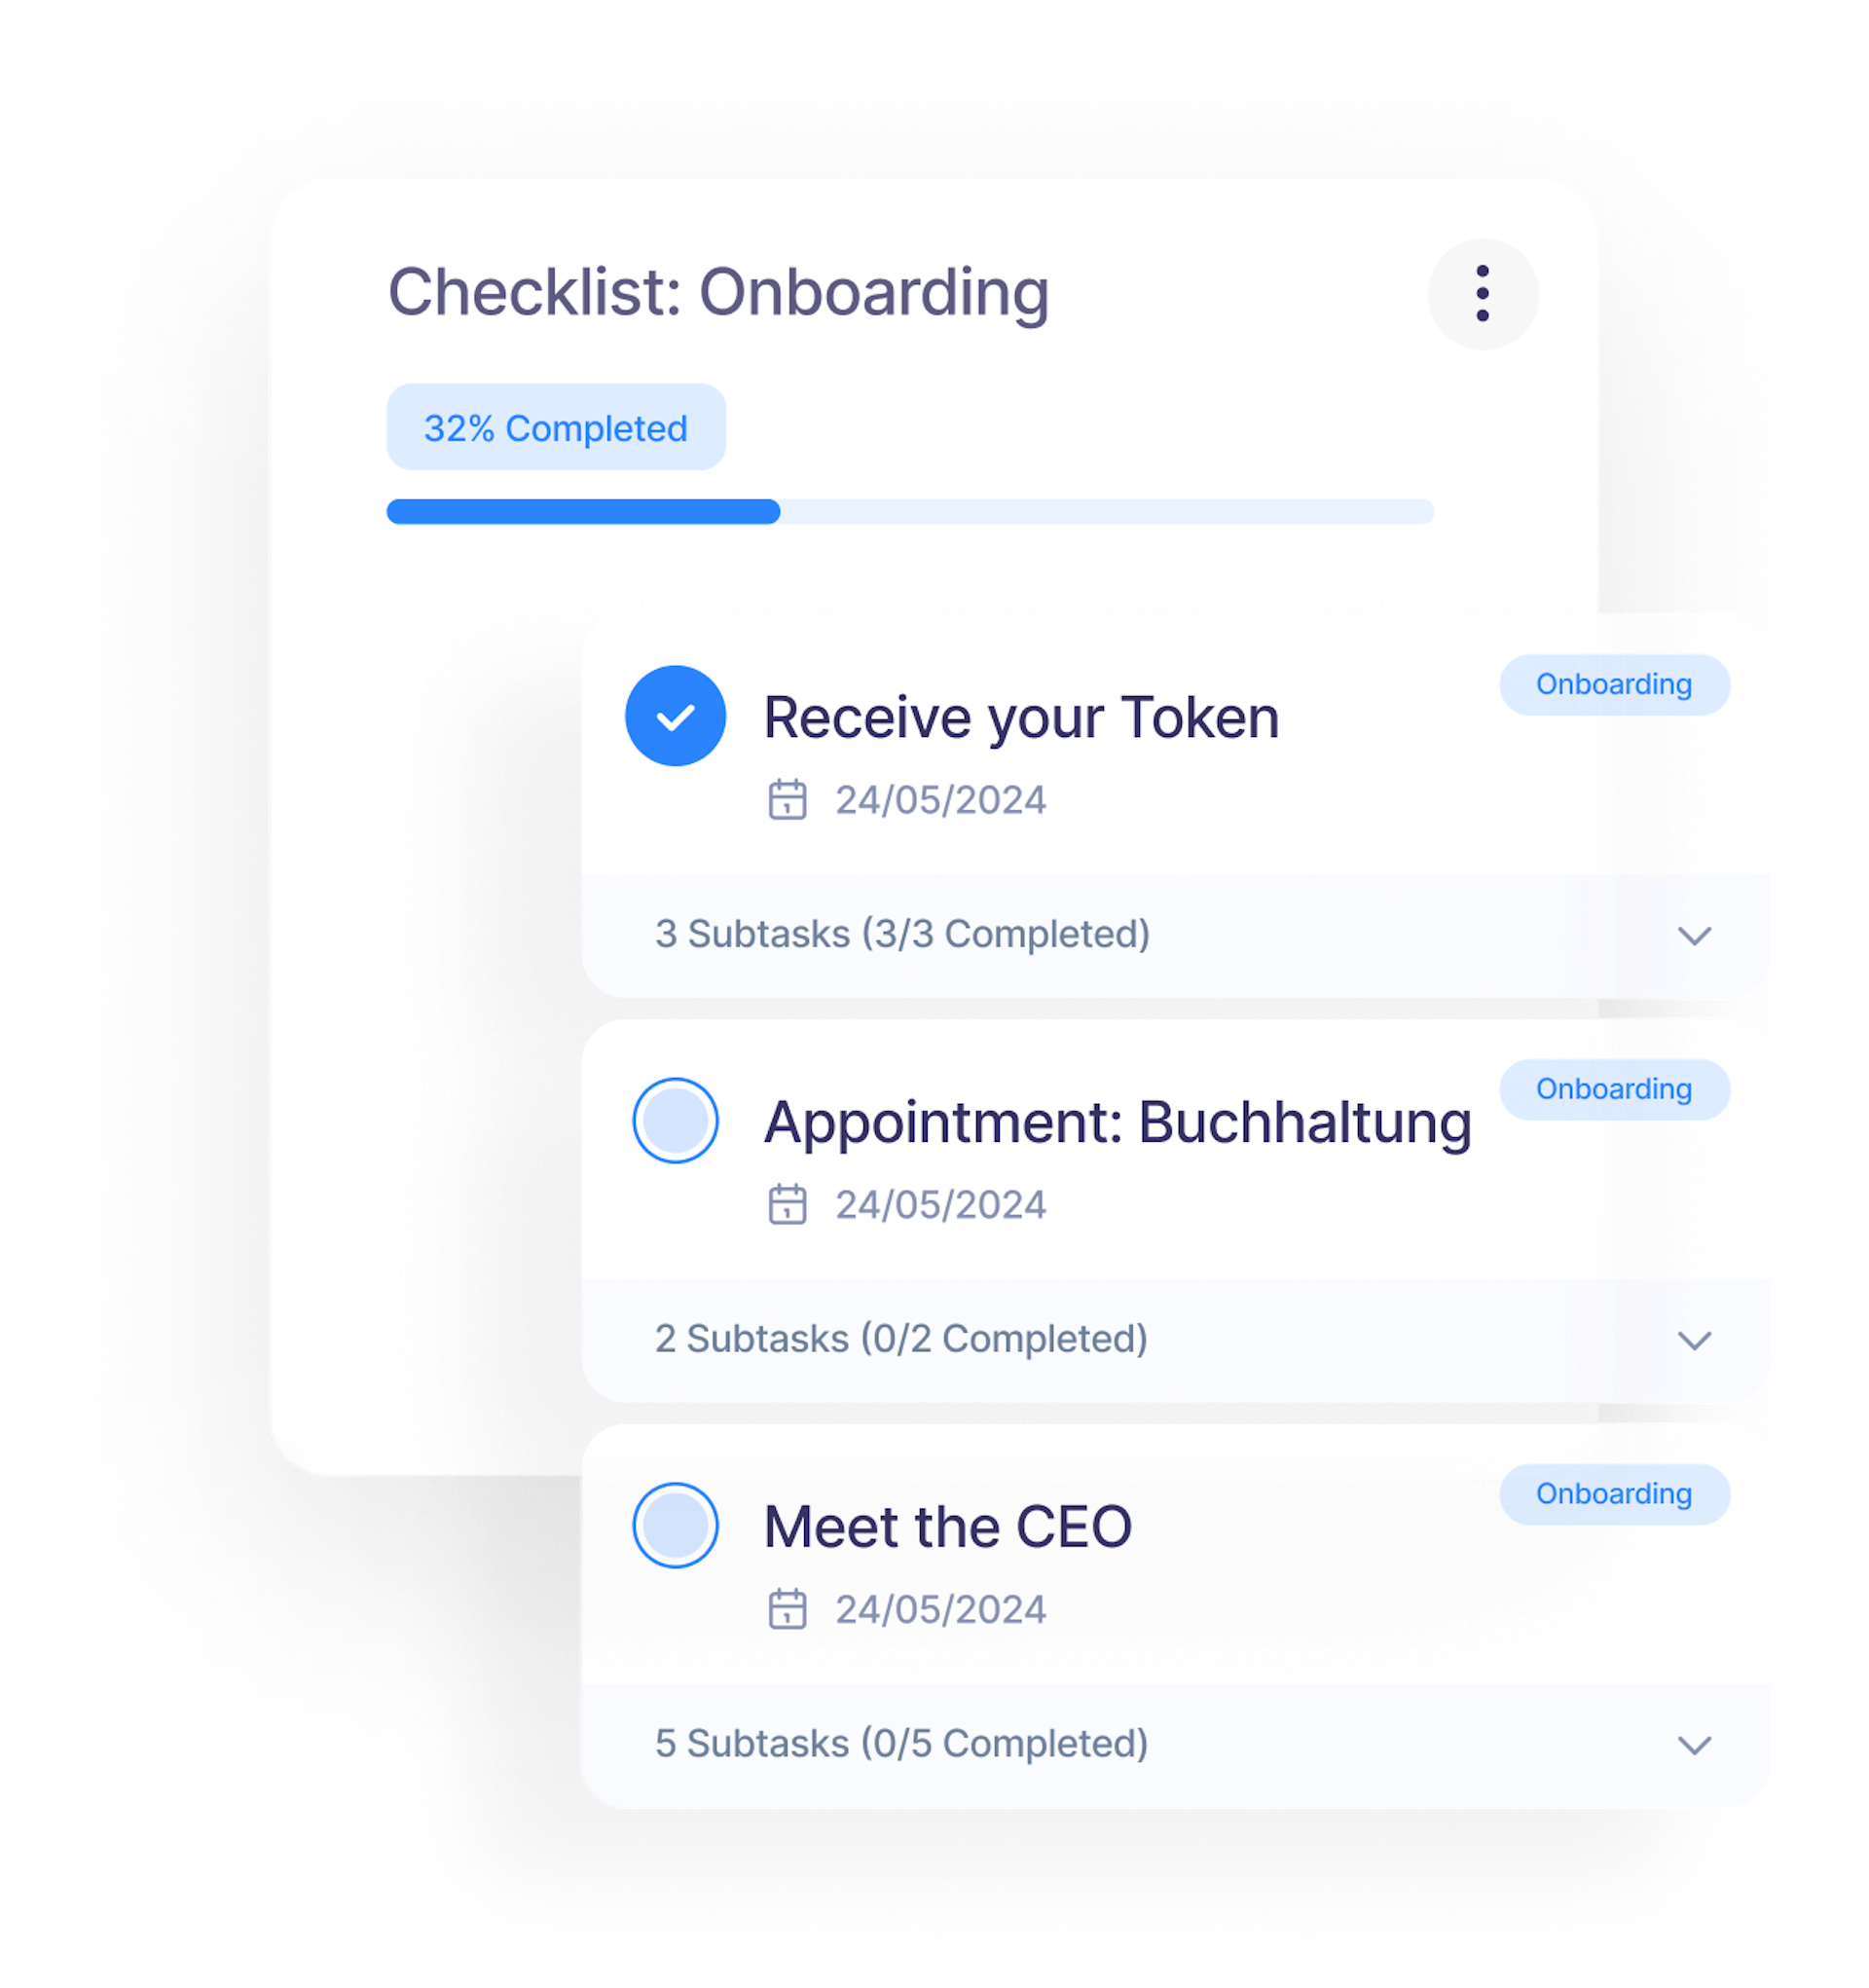 Fast and structured onboarding of new employees